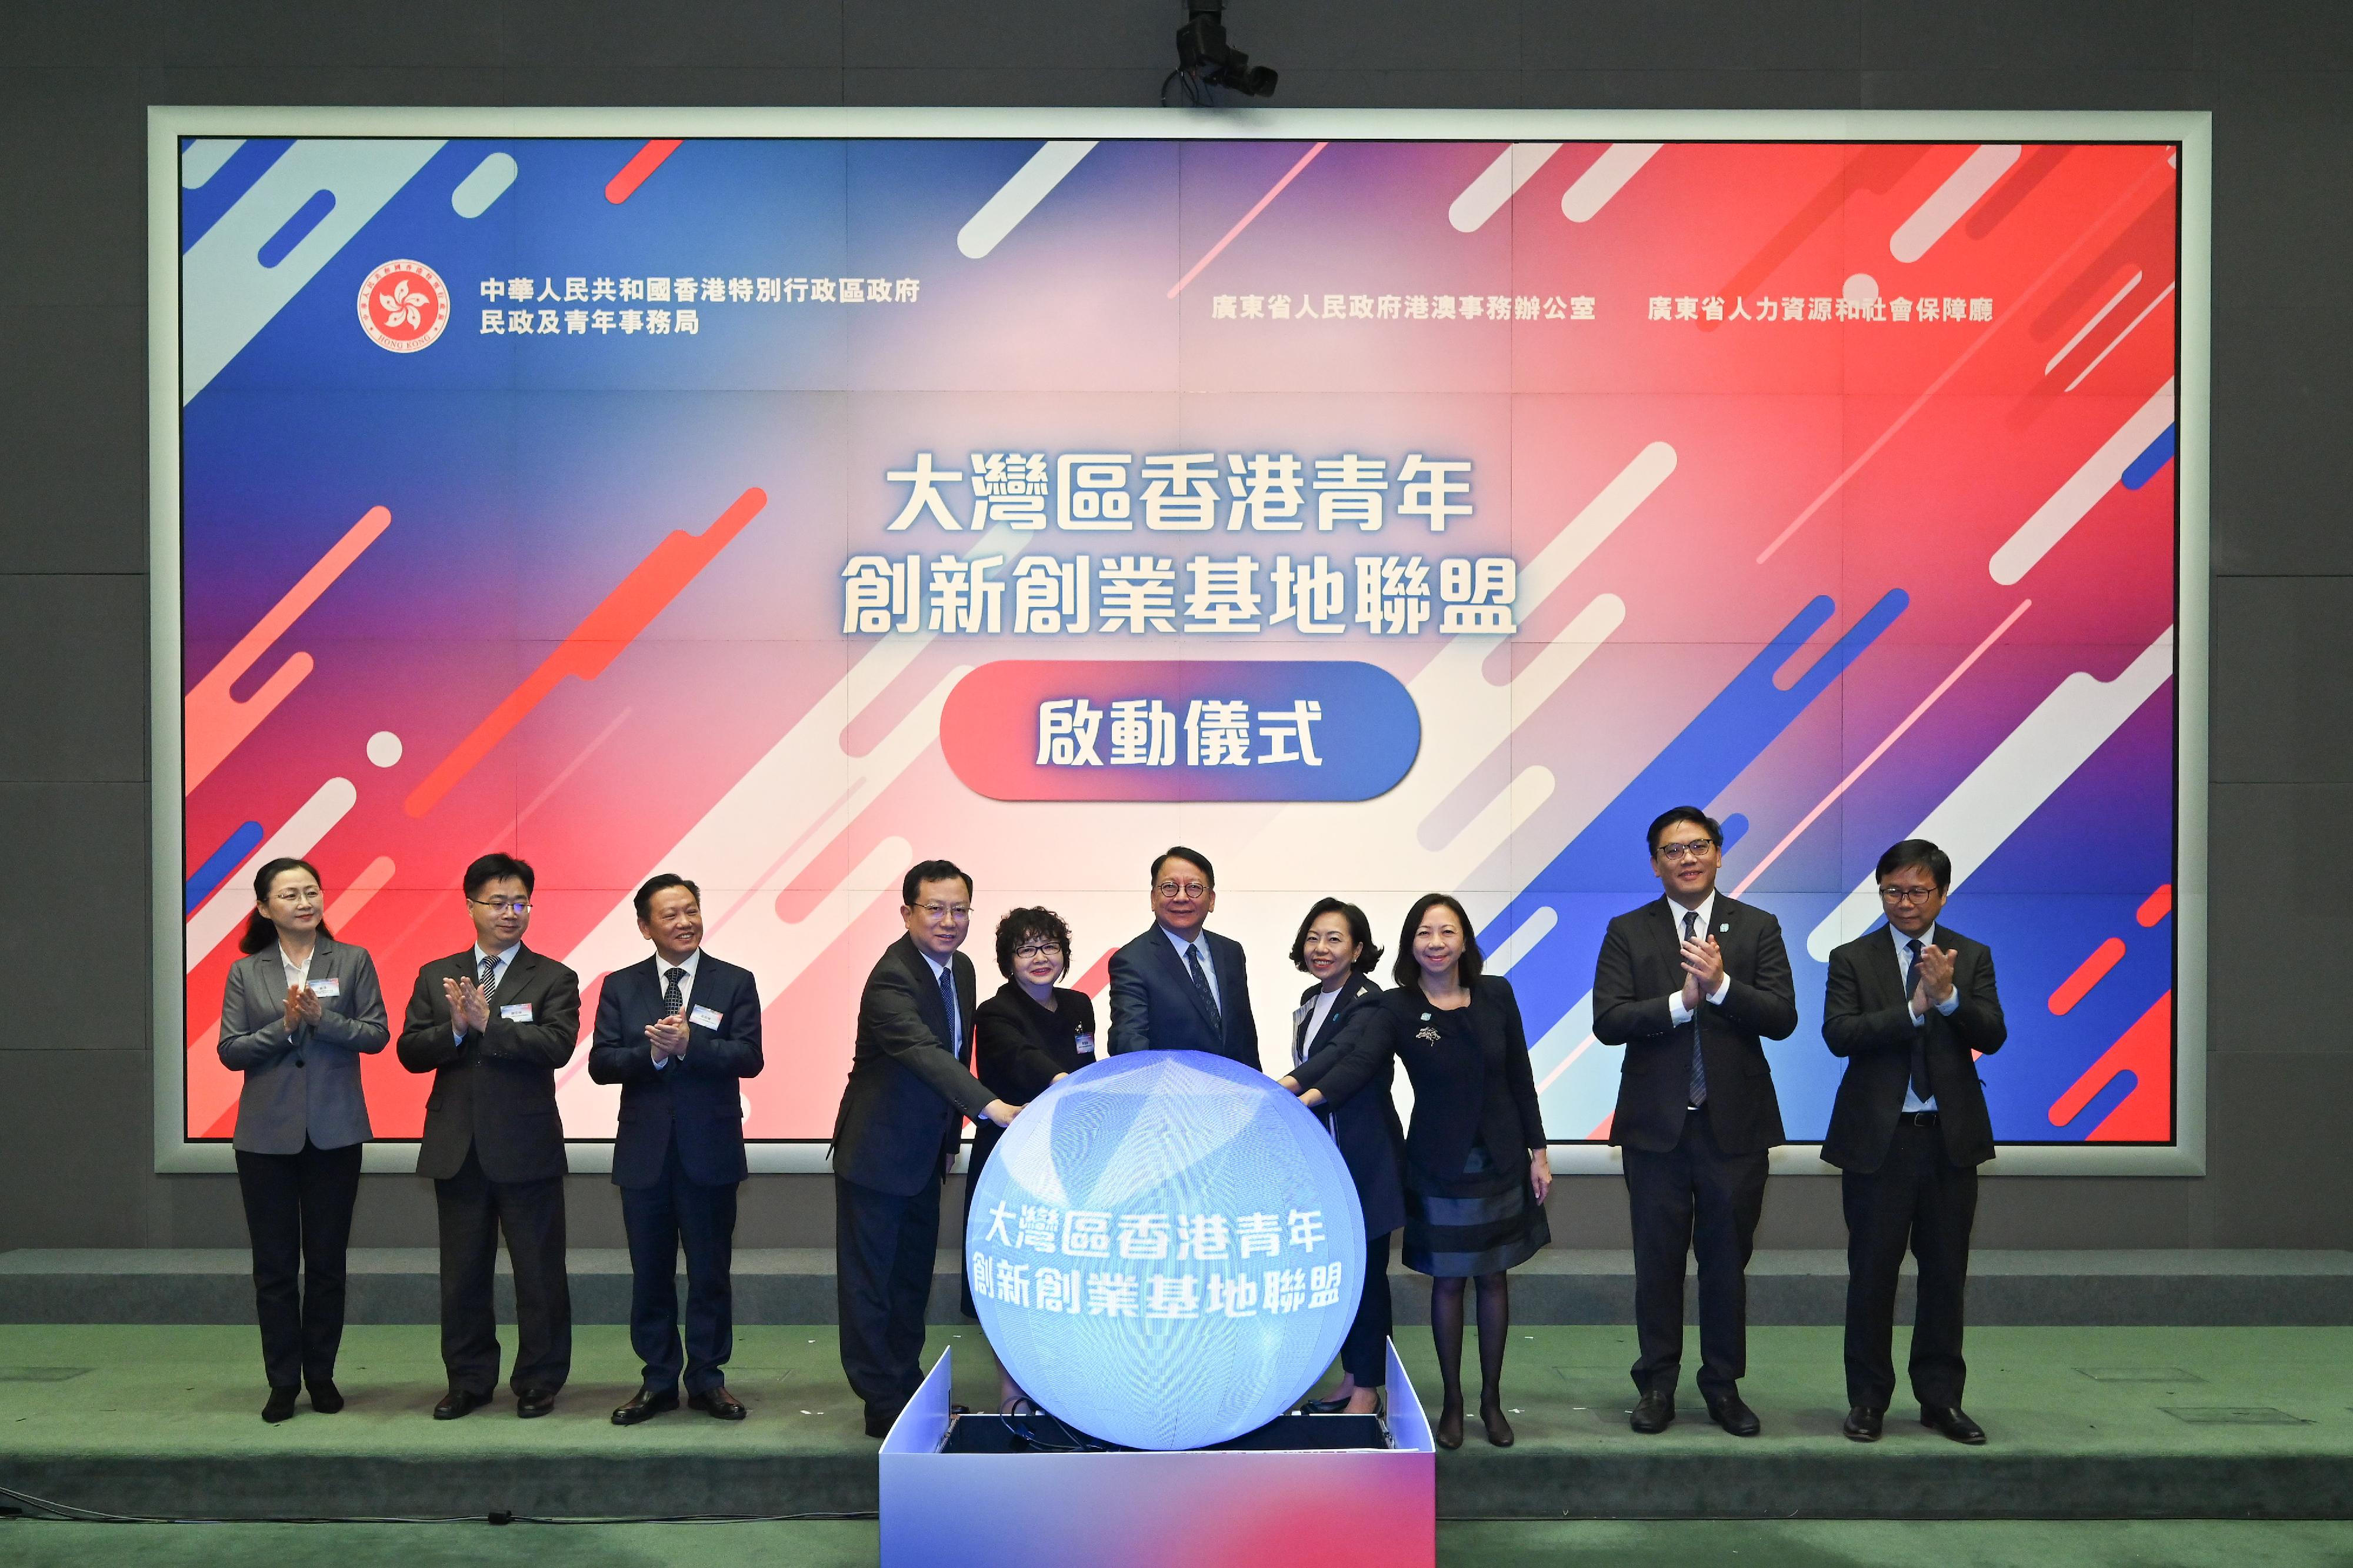 The Chief Secretary for Administration, Mr Chan Kwok-ki (fifth right), officiated at the Kick-off Ceremony for Alliance of Hong Kong Youth Innovation and Entrepreneurial Bases in the Greater Bay Area this afternoon (December 15). Looking on are the Director General of the Hong Kong and Macao Affairs Office of the People's Government of Guangdong Province, Ms Li Huanchun (fifth left); the Director-General of the Human Resources and Social Security Department of Guangdong Province, Mr Du Minqi (fourth left); the Secretary for Home and Youth Affairs, Miss Alice Mak (fourth right); the Permanent Secretary for Home and Youth Affairs, Ms Shirley Lam (third right), and other guests.